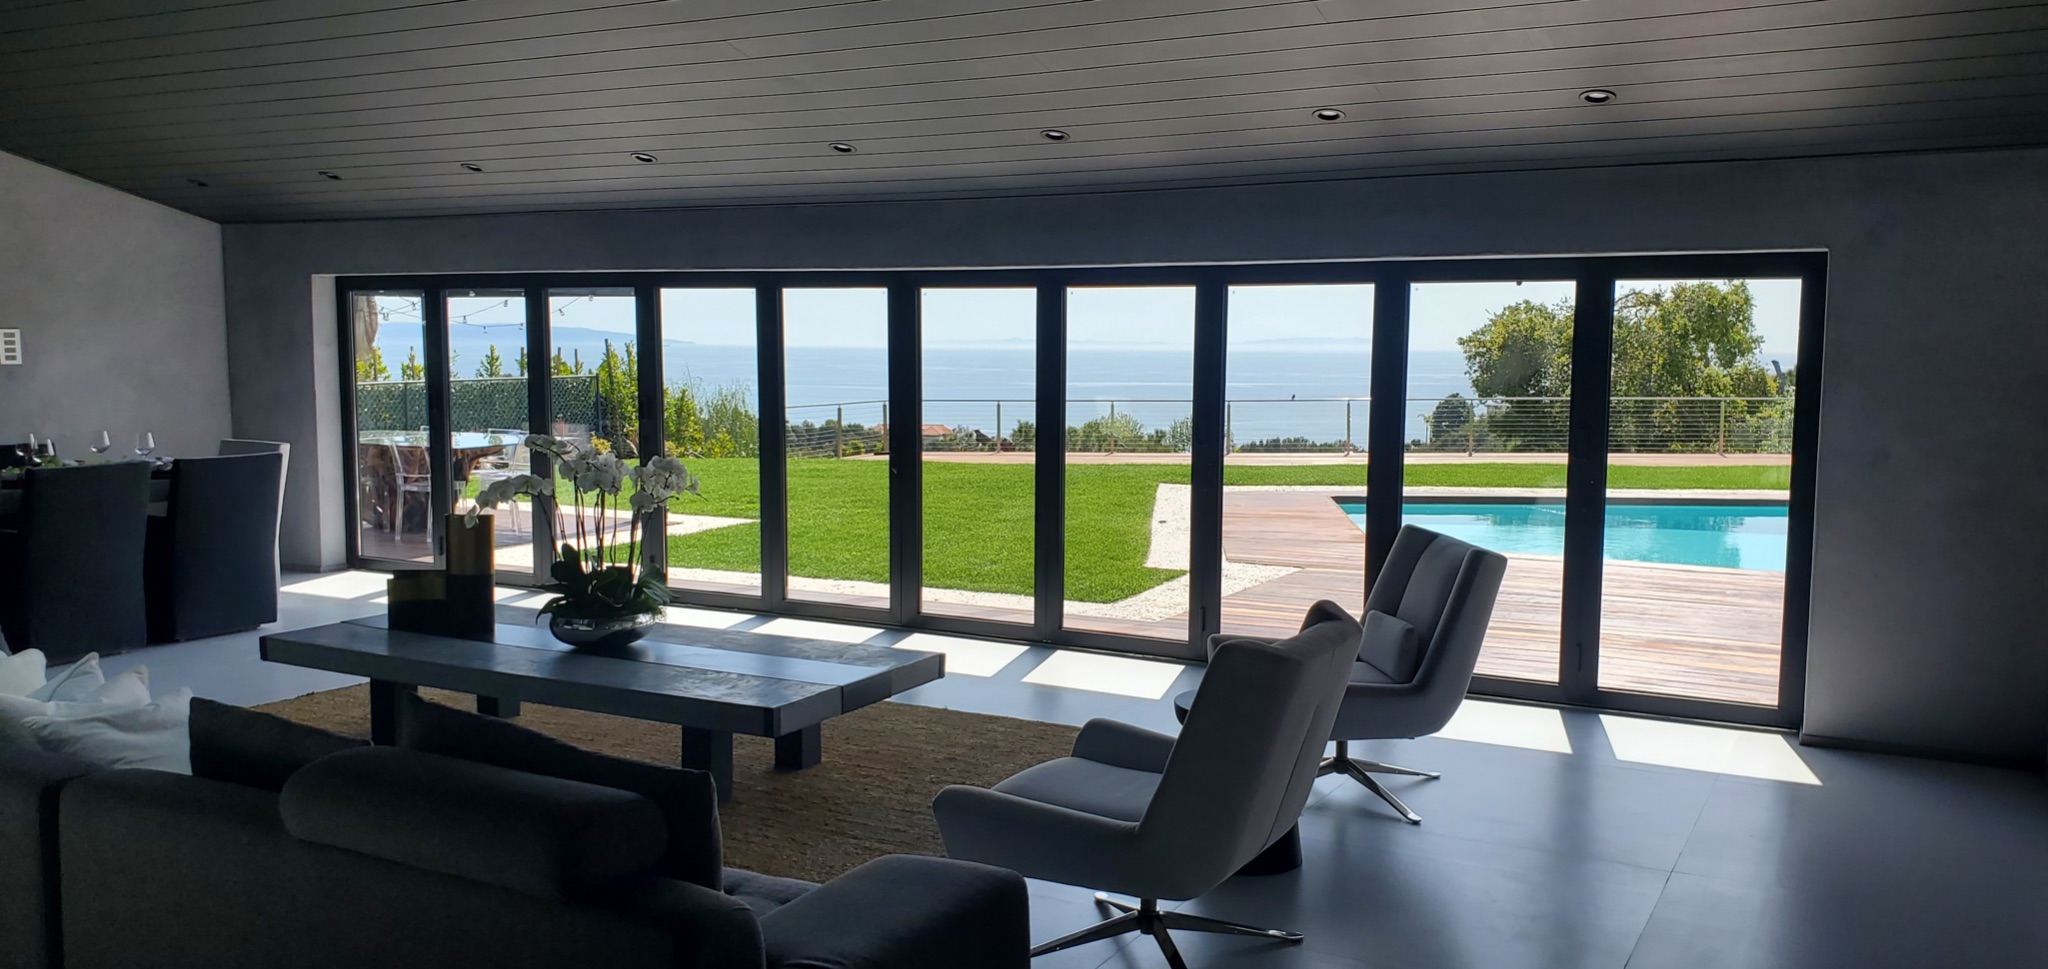 How Bifold Doors Can Transform Any Room